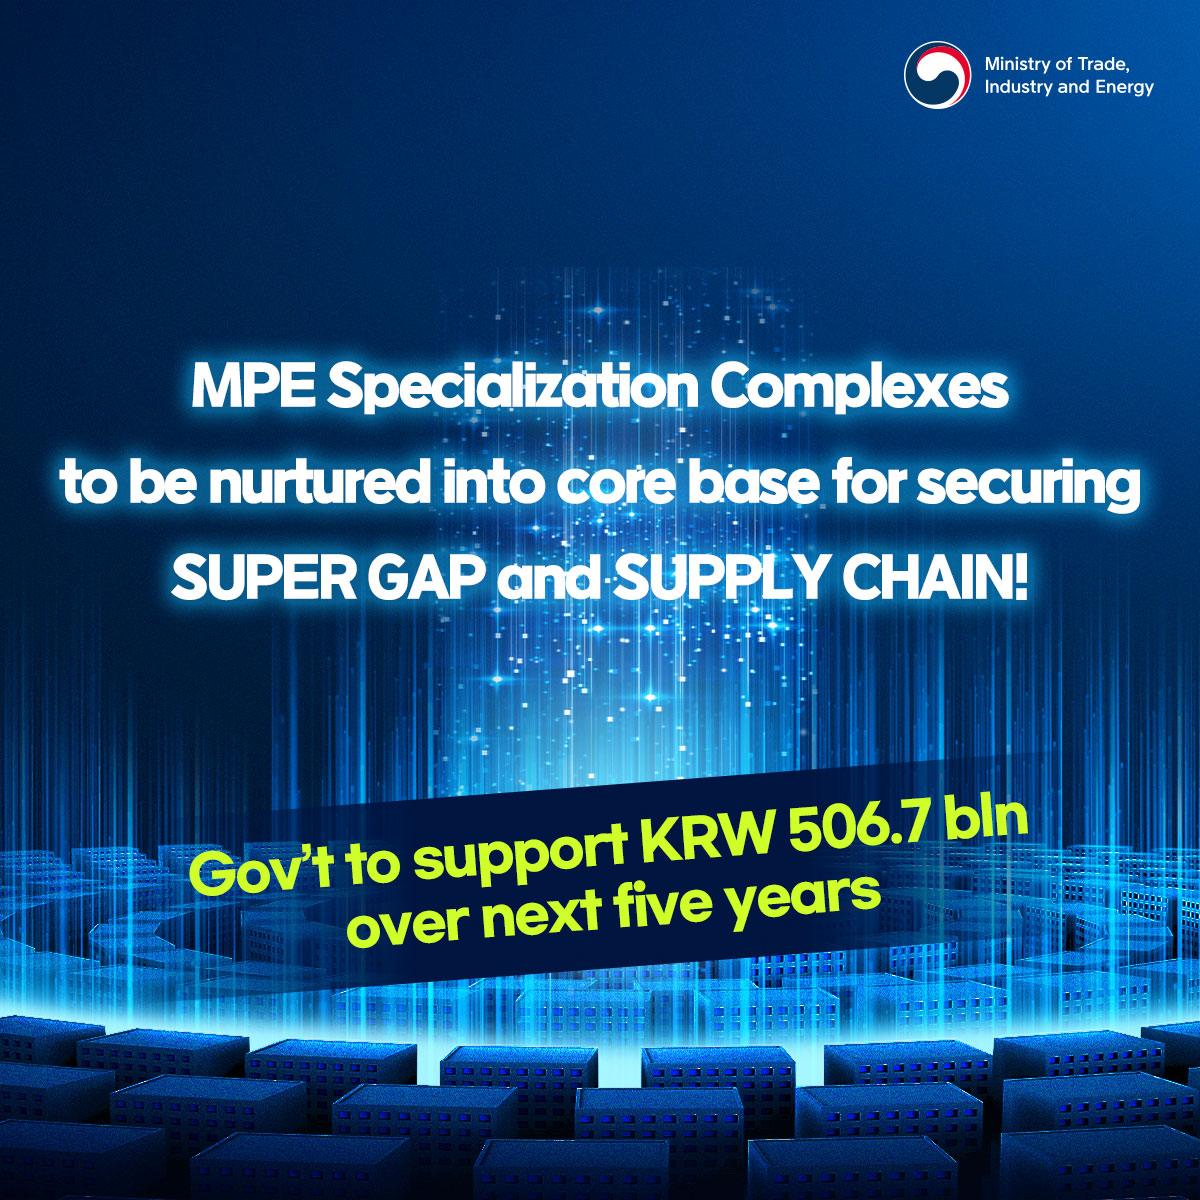 Government to nurture MPE specialization complexes into key bases for supply chain and super gap